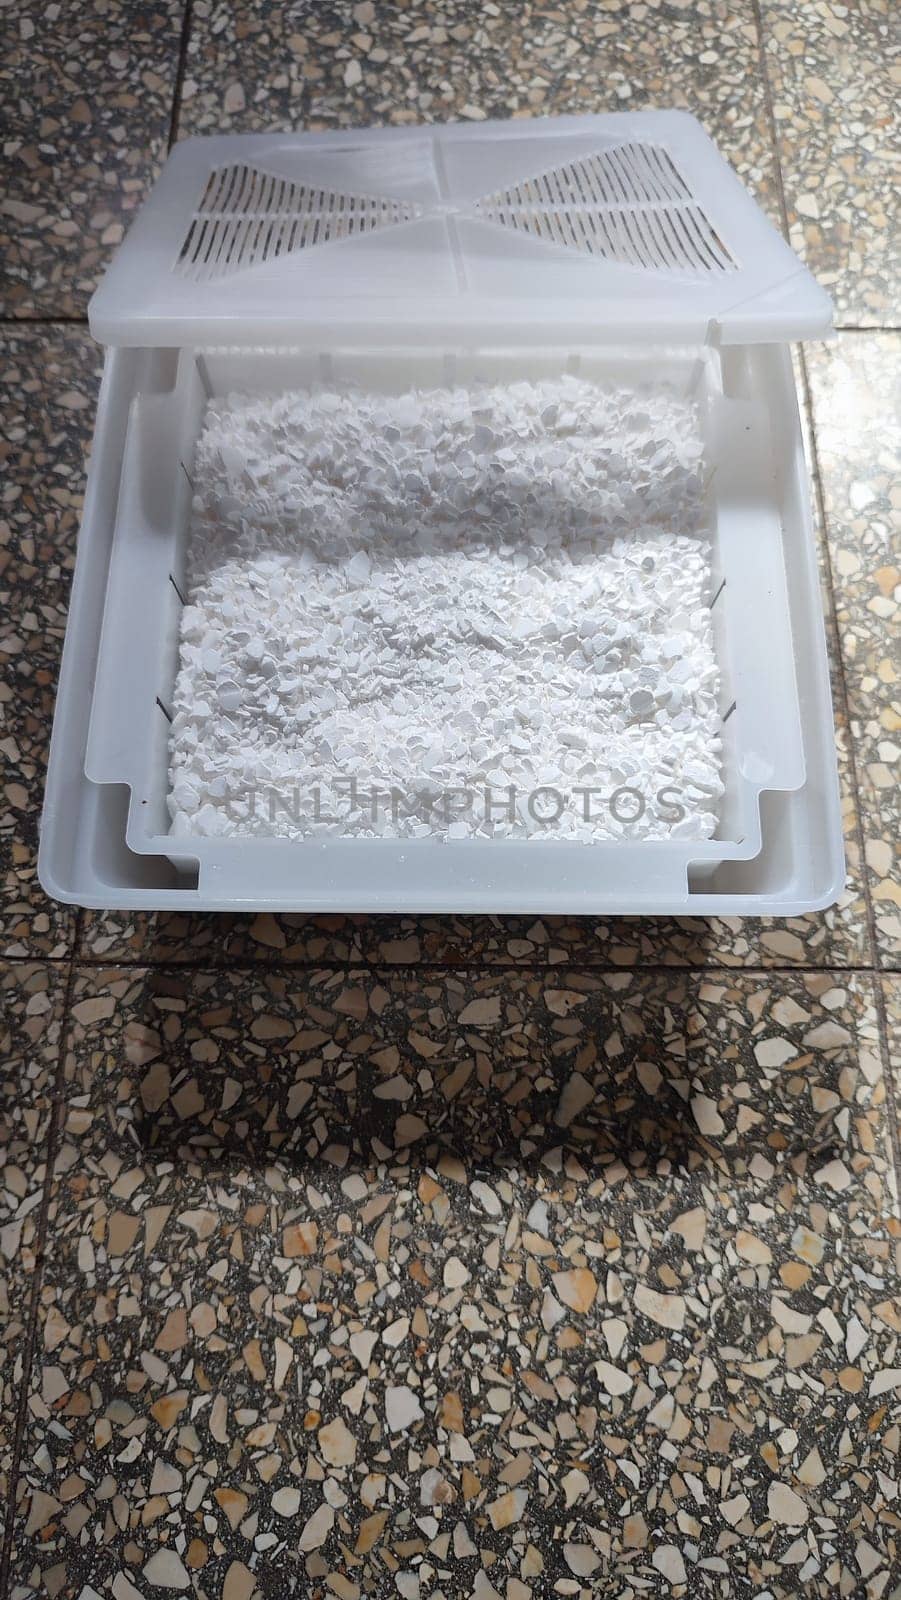 white plastic container, moisture absorber. High quality photo